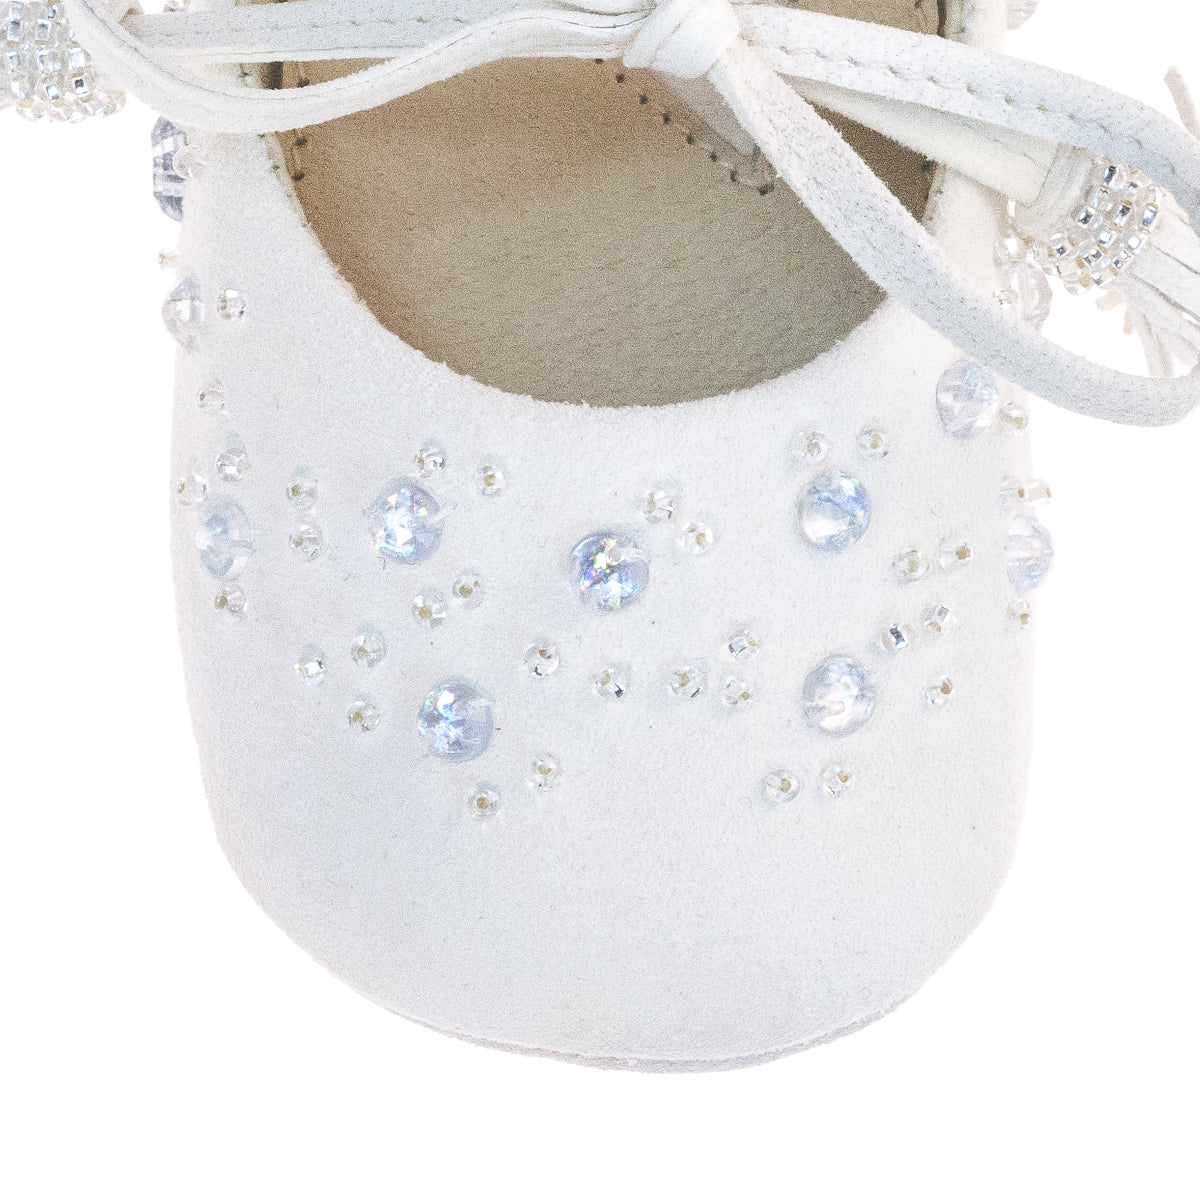 Vibys-Baby-Shoes-Cinderella-details-toe-view